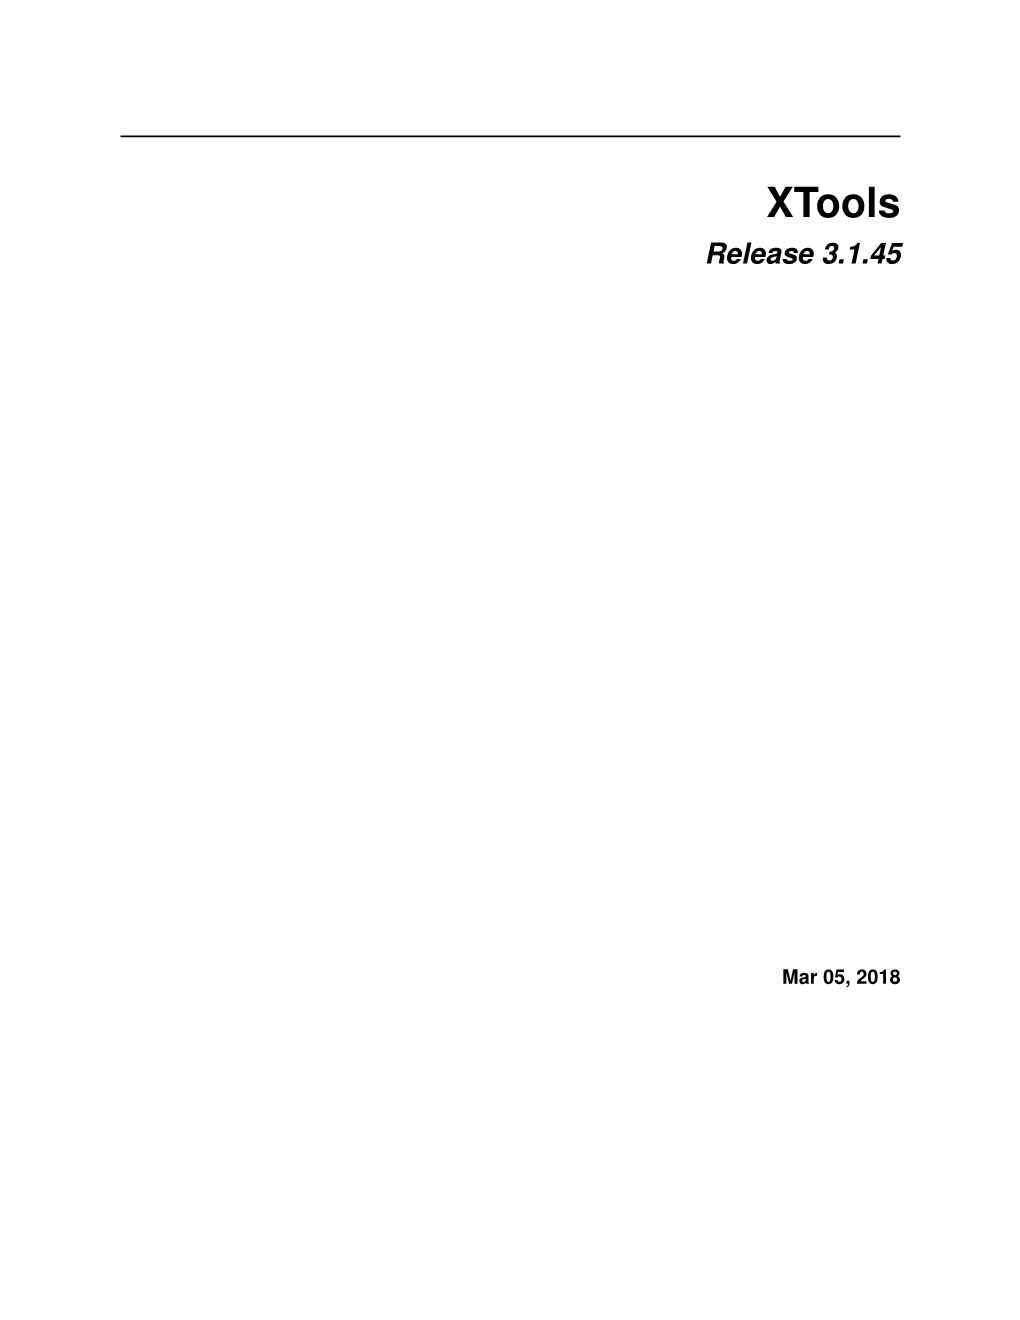 Xtools Release 3.1.45